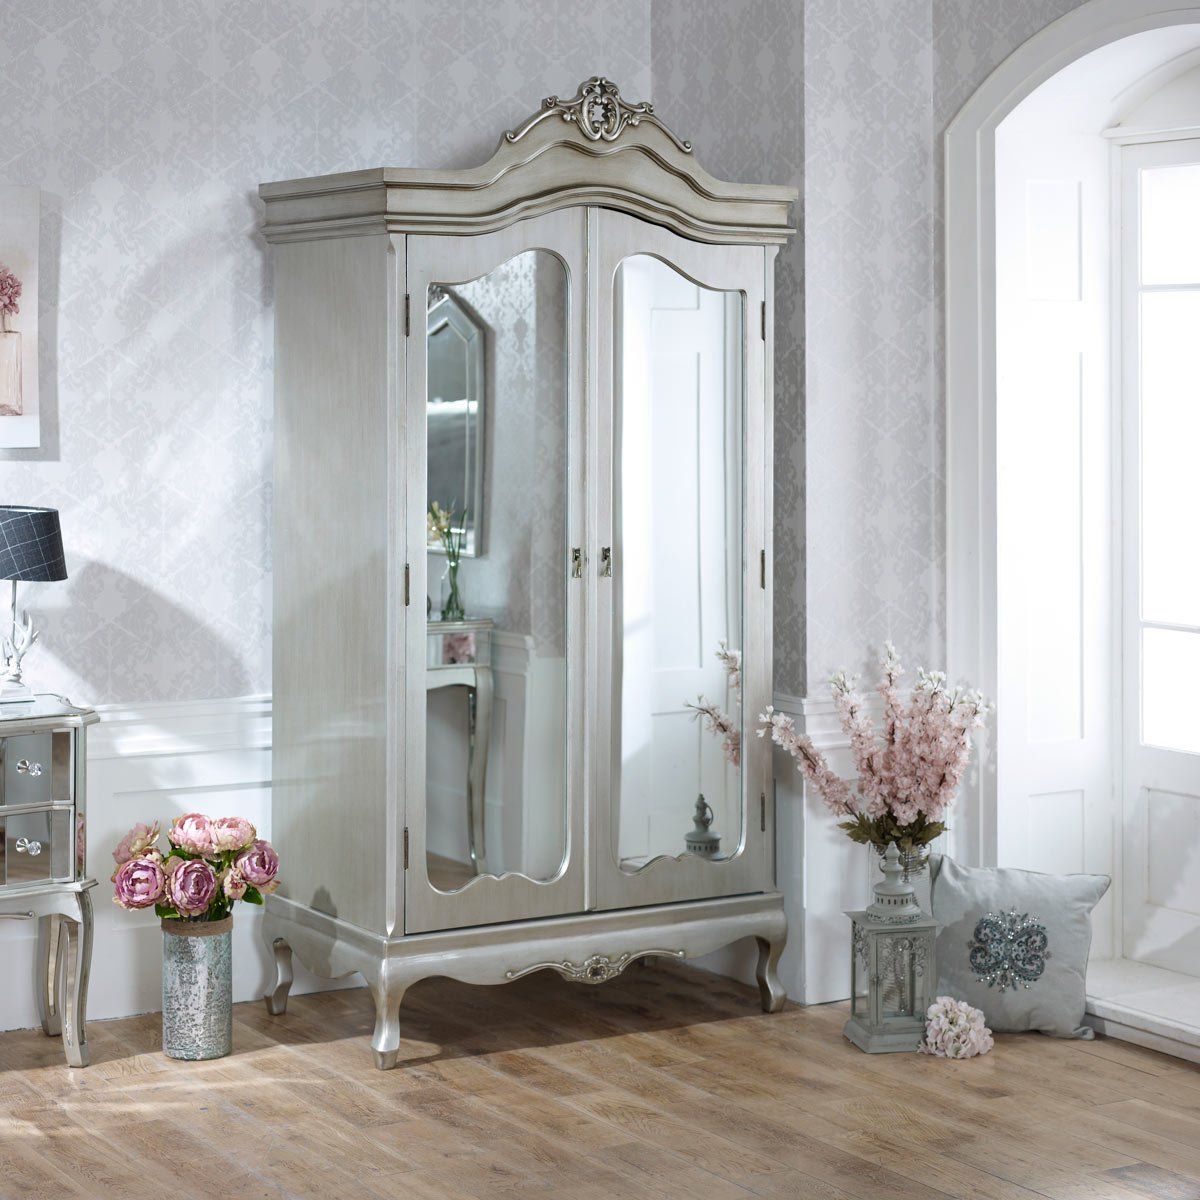 Mirrored Double Wardrobe – Tiffany Range Intended For Vintage Shabby Chic Wardrobes (View 3 of 20)